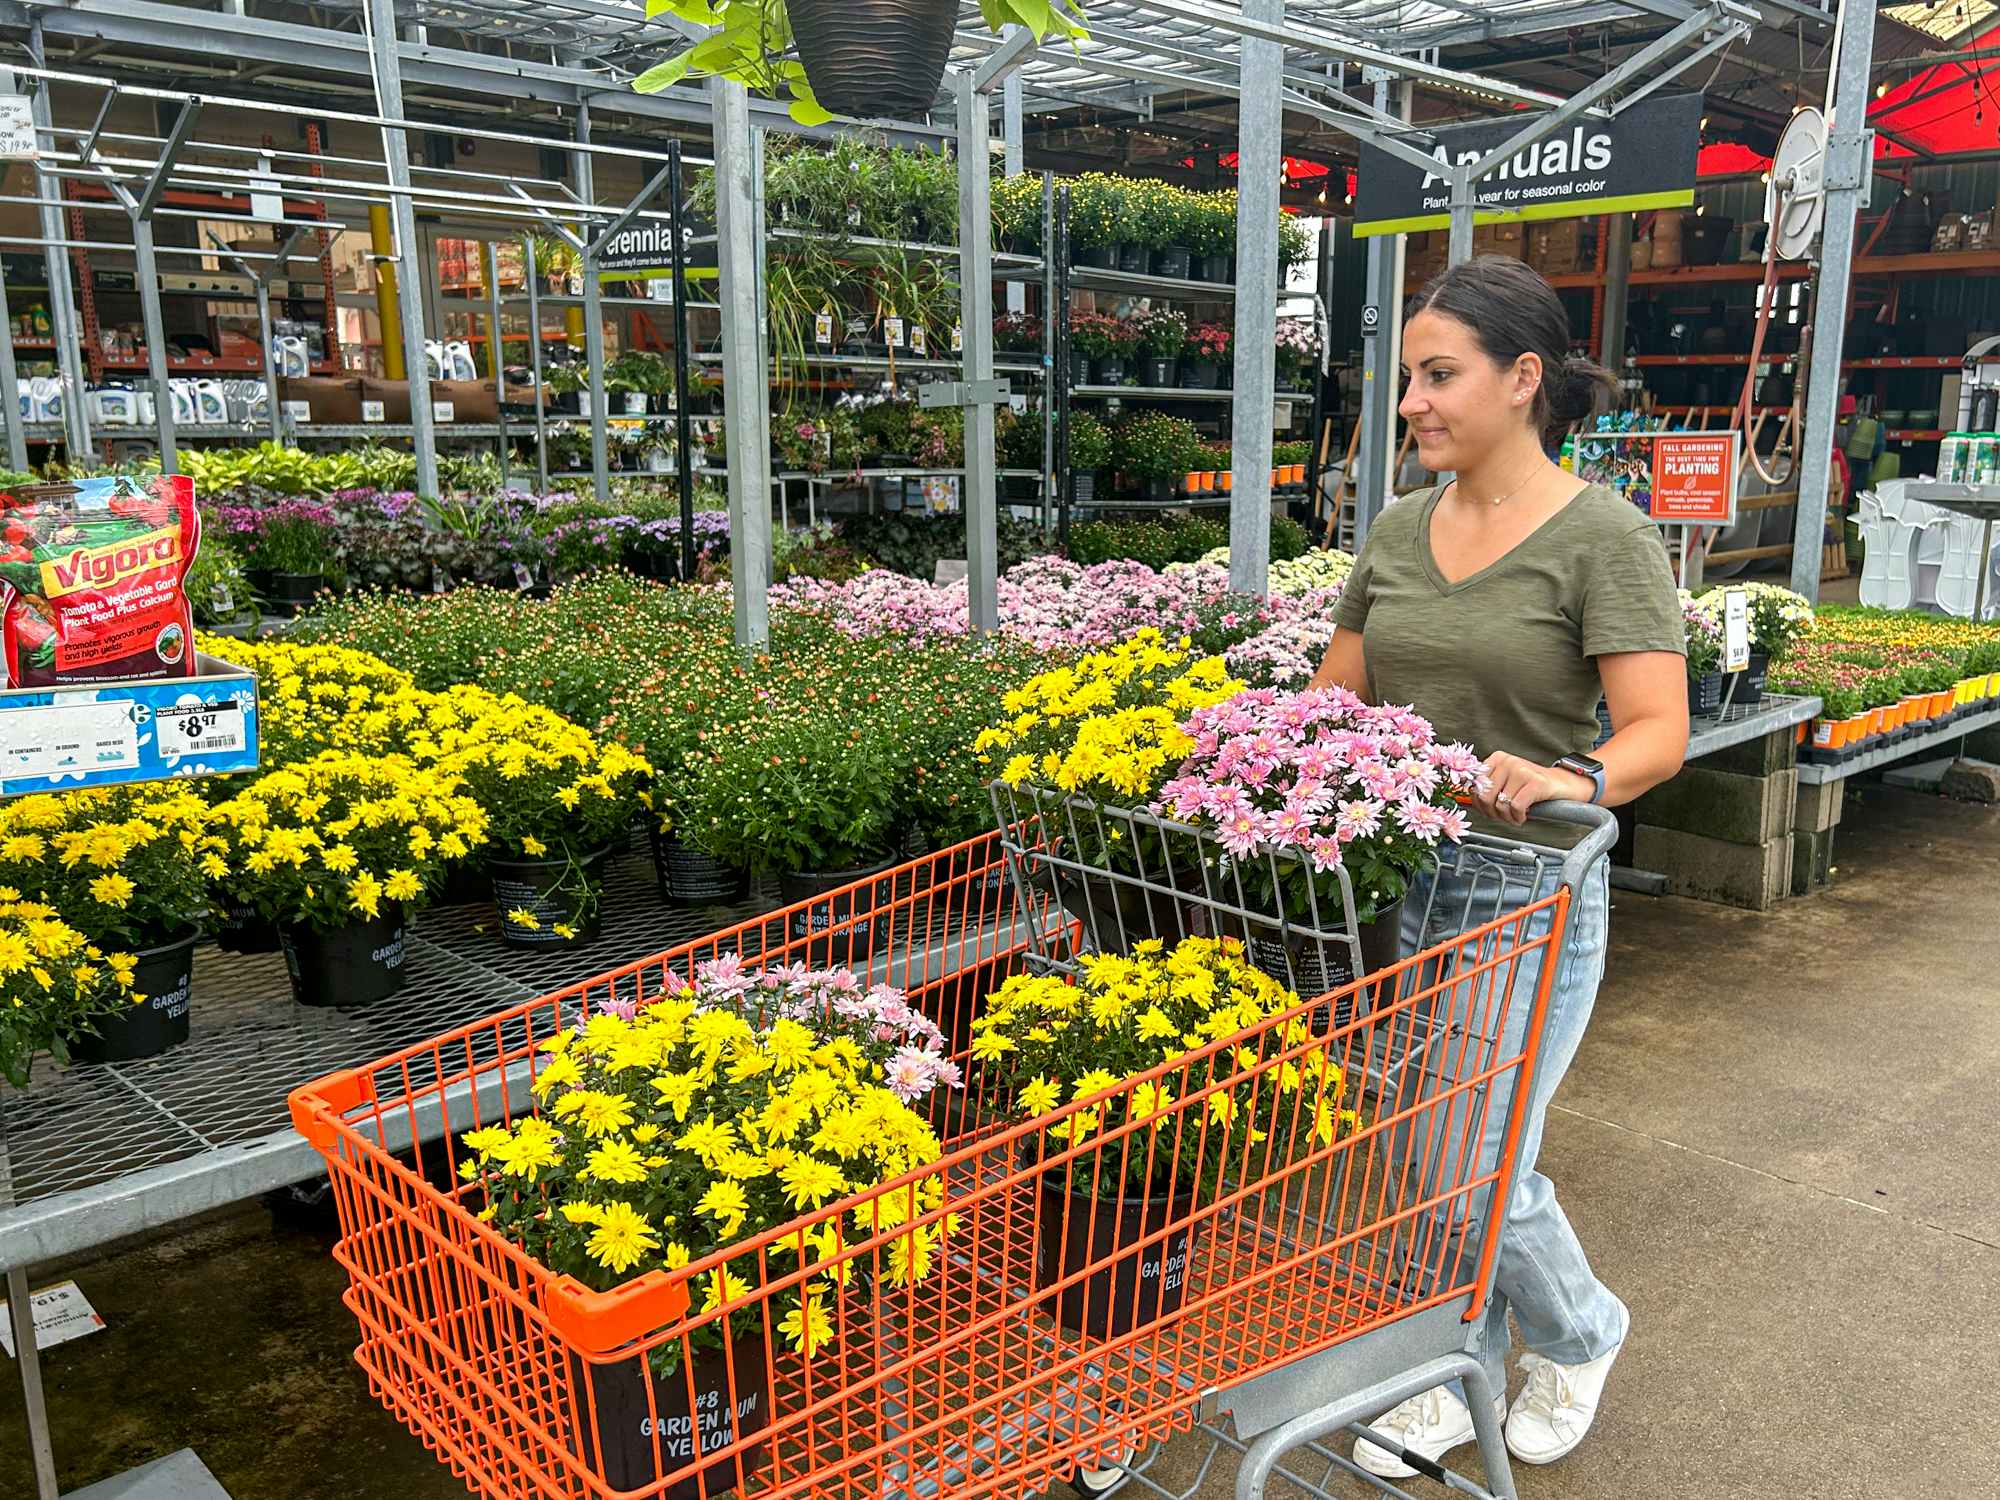 https://prod-cdn-thekrazycouponlady.imgix.net/wp-content/uploads/2021/09/home-depot-labor-day-sale-cart-mums-model-kcl-2-1692894403-1692894403.jpg?auto=format&fit=fill&q=25